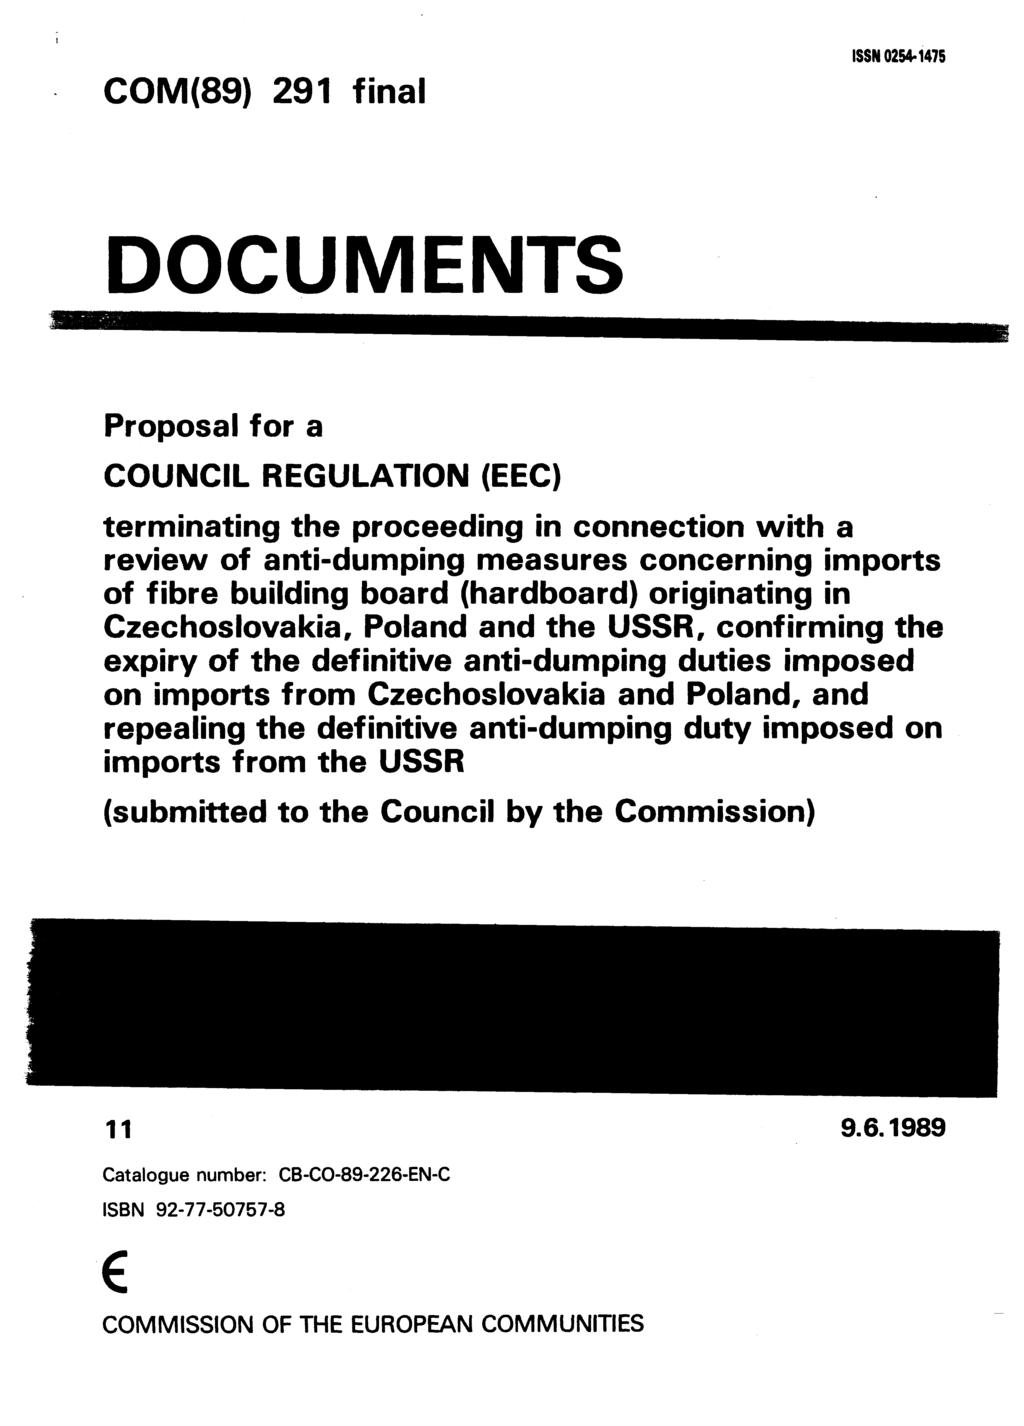 COM(89) 291 final ISSN 0254-1475 DOCUMENTS Proposal for a COUNCIL REGULATION (EEC) terminating the proceeding in connection with a review of anti-dumping measures concerning imports of fibre building